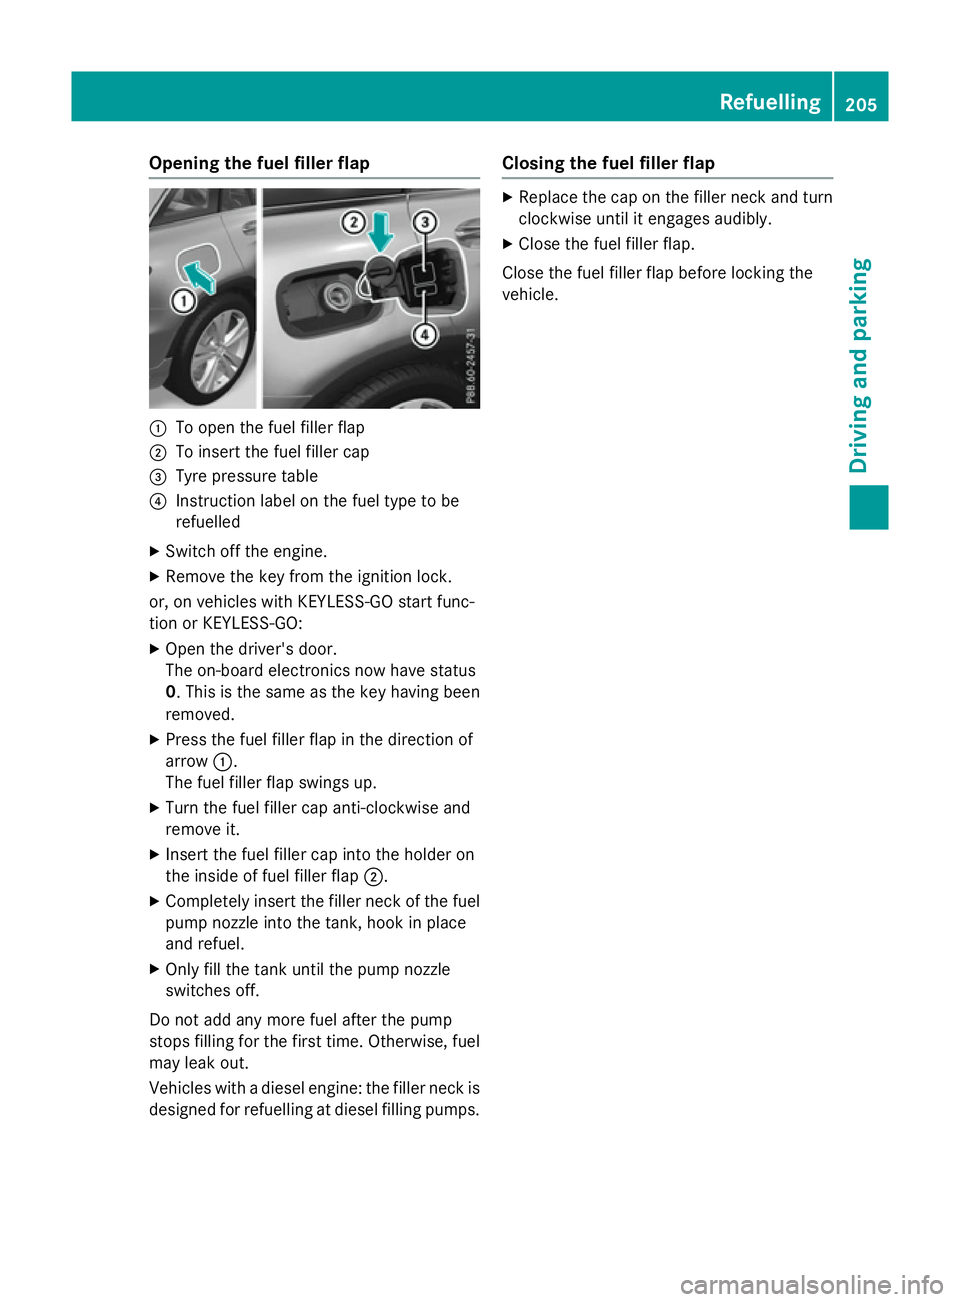 MERCEDES-BENZ GLC SUV 2015  Owners Manual Opening the fuel filler flap
:
To open the fuel filler flap
; To insert the fuel filler cap
= Tyre pressure table
? Instruction label on the fuel type to be
refuelled
X Switch off the engine.
X Remove